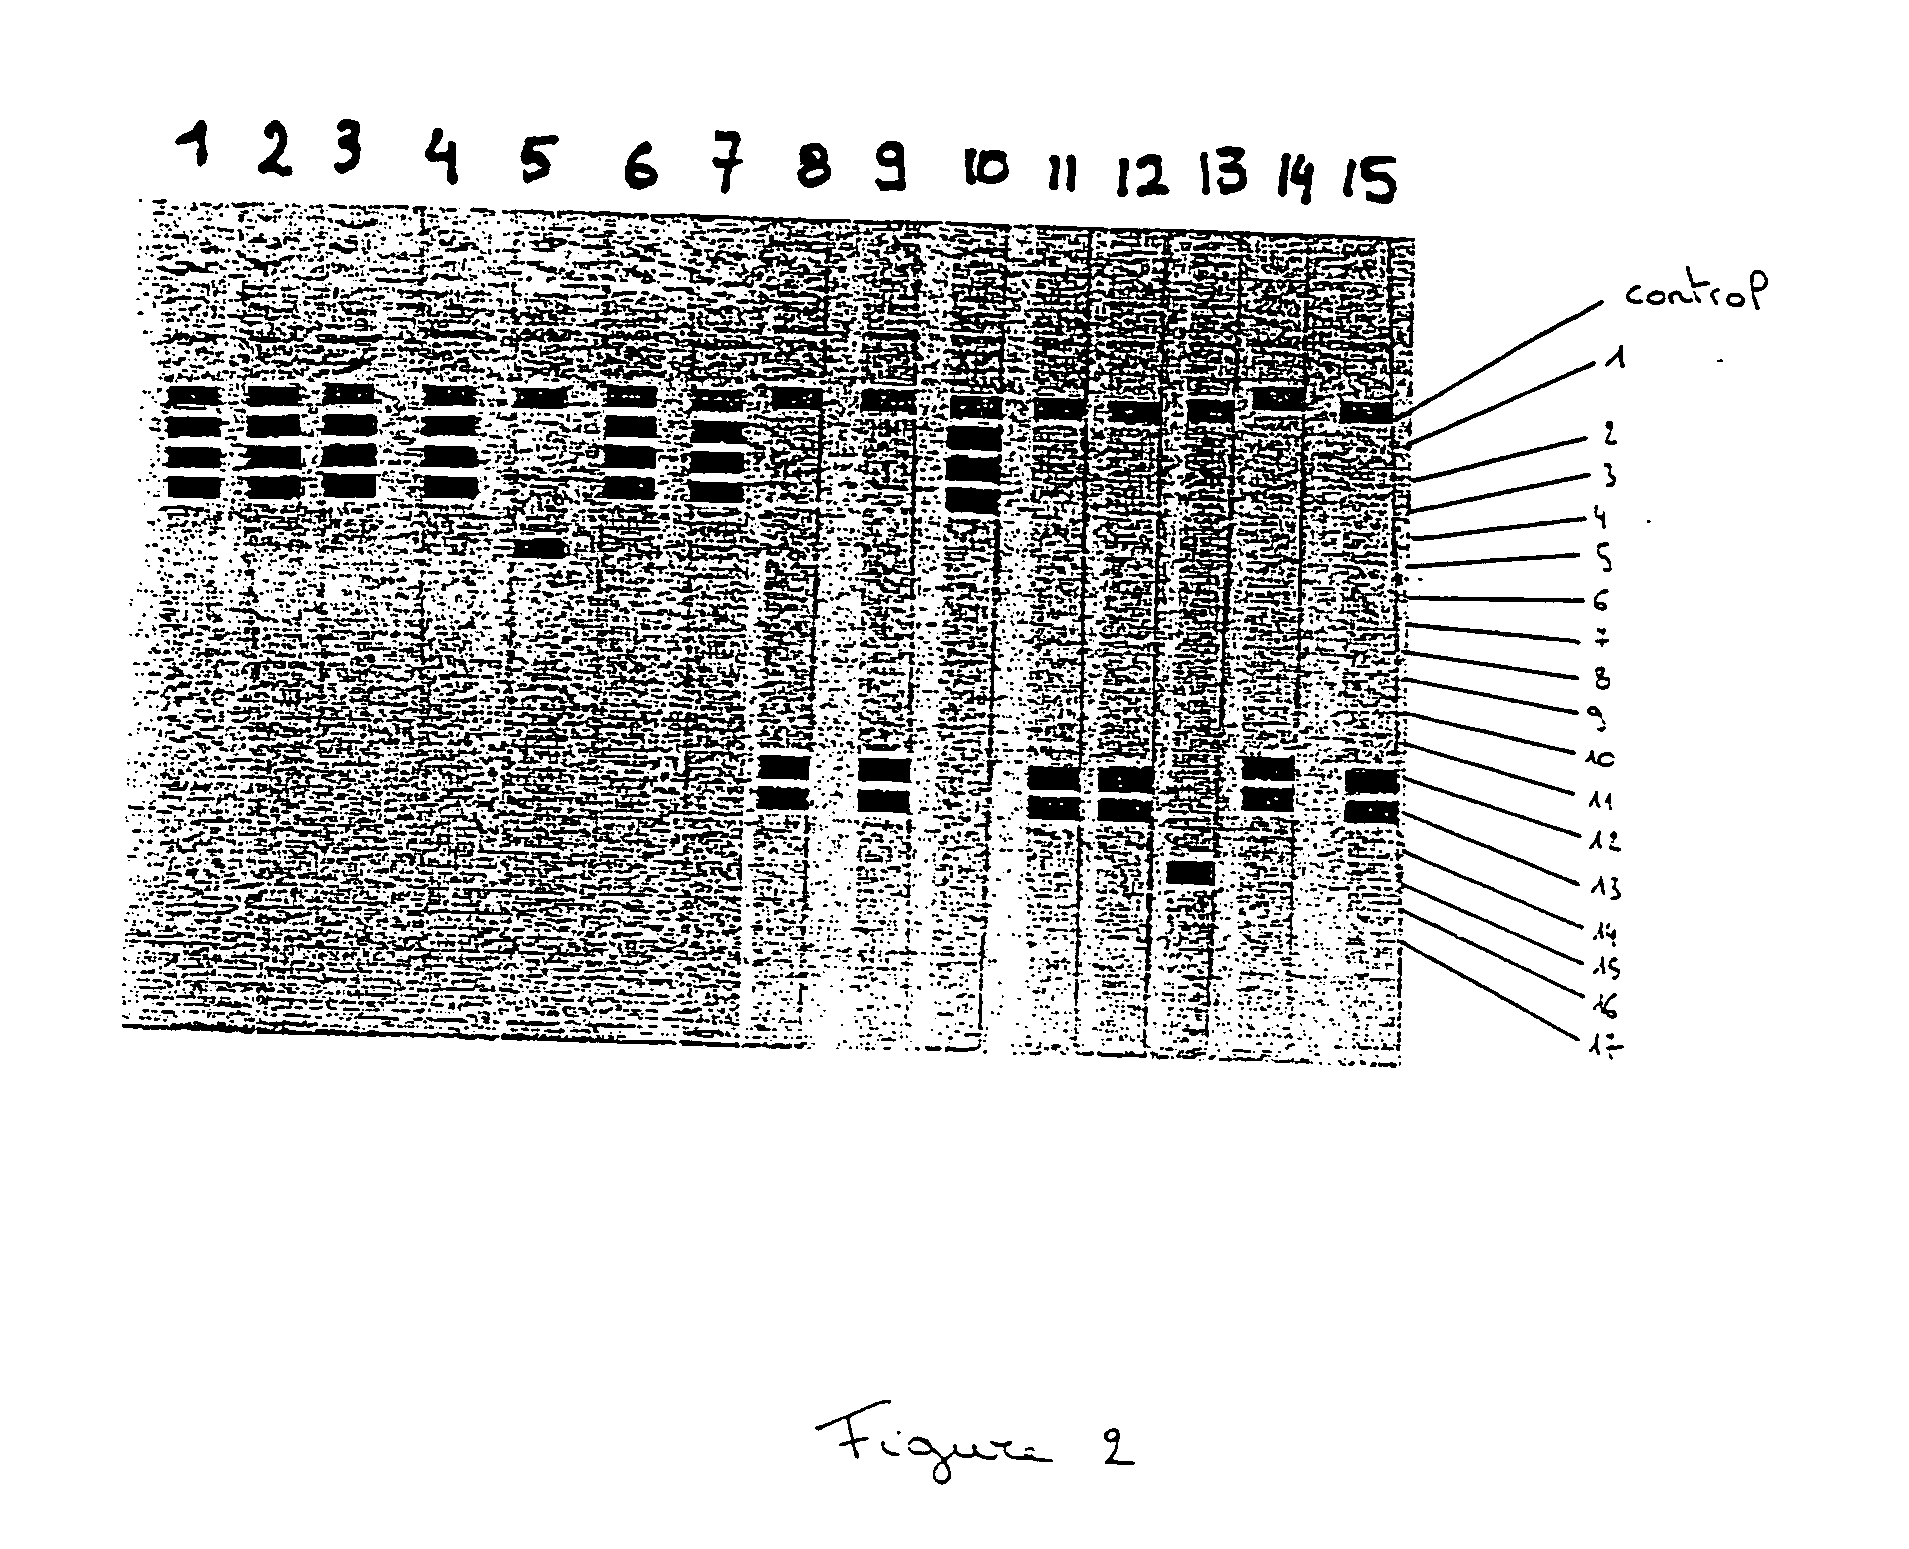 Nucleic acid probes and methods for detecting clinically important fungal pathogens